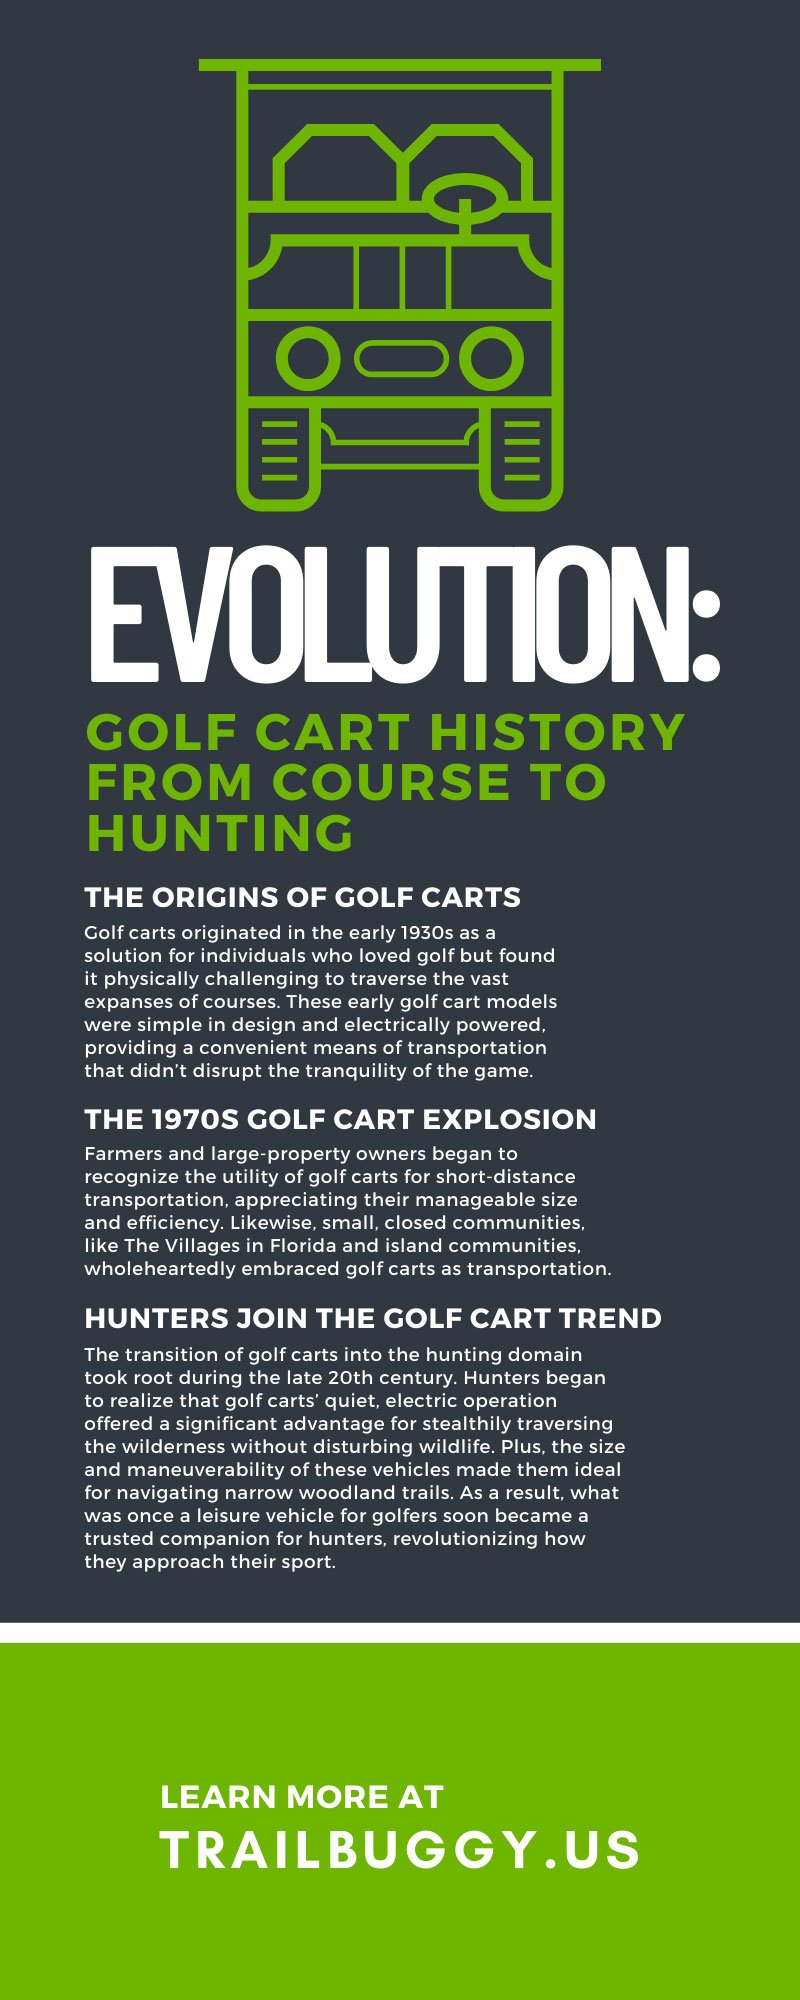 Evolution: Golf Cart History From Course to Hunting